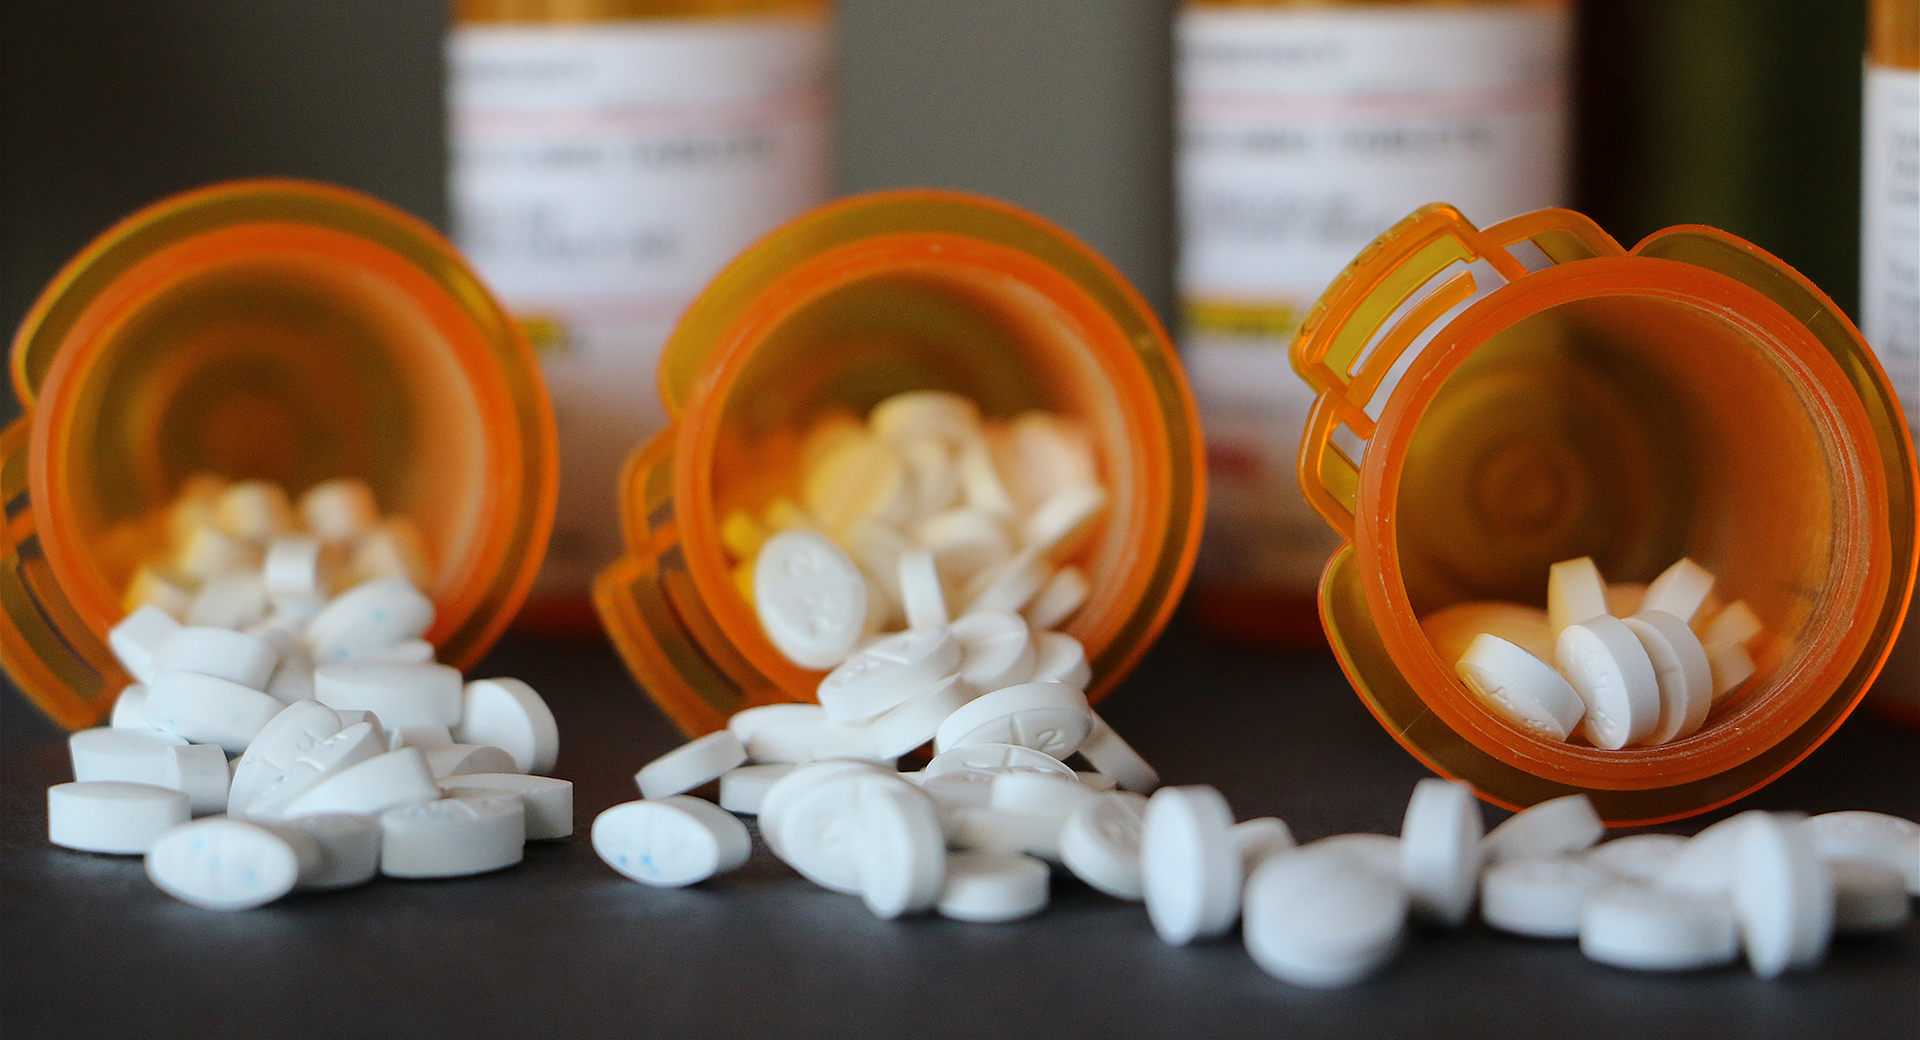 Prescription Drug Take-Back Day Necessary After Year of Record Overdose Deaths